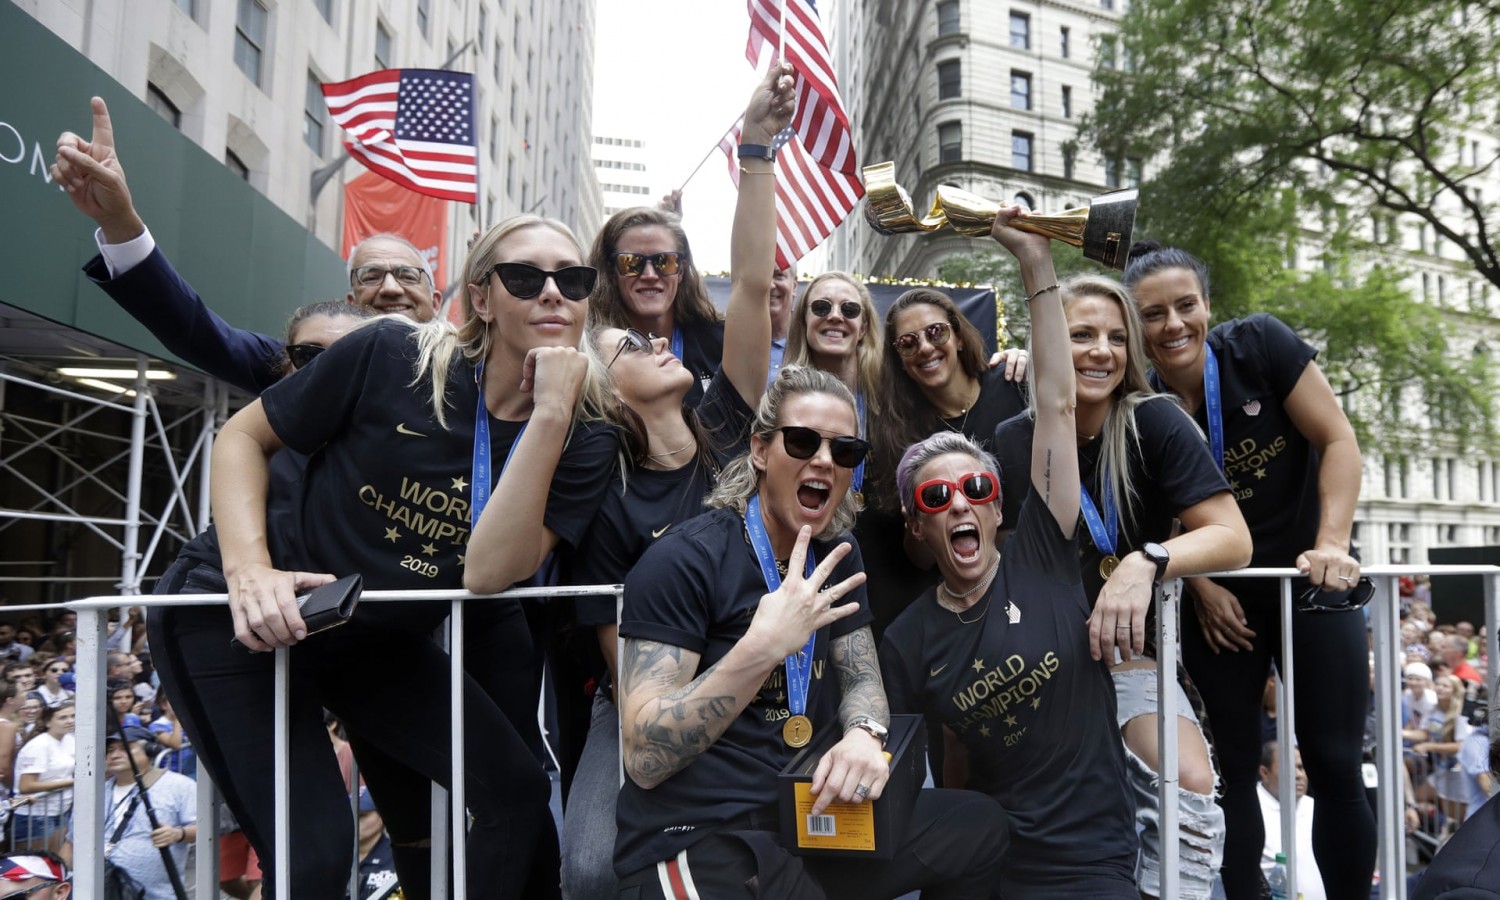 Megan Rapinoe holds the Women’s World Cup trophy on the parade float. Photograph: Richard Drew/AP